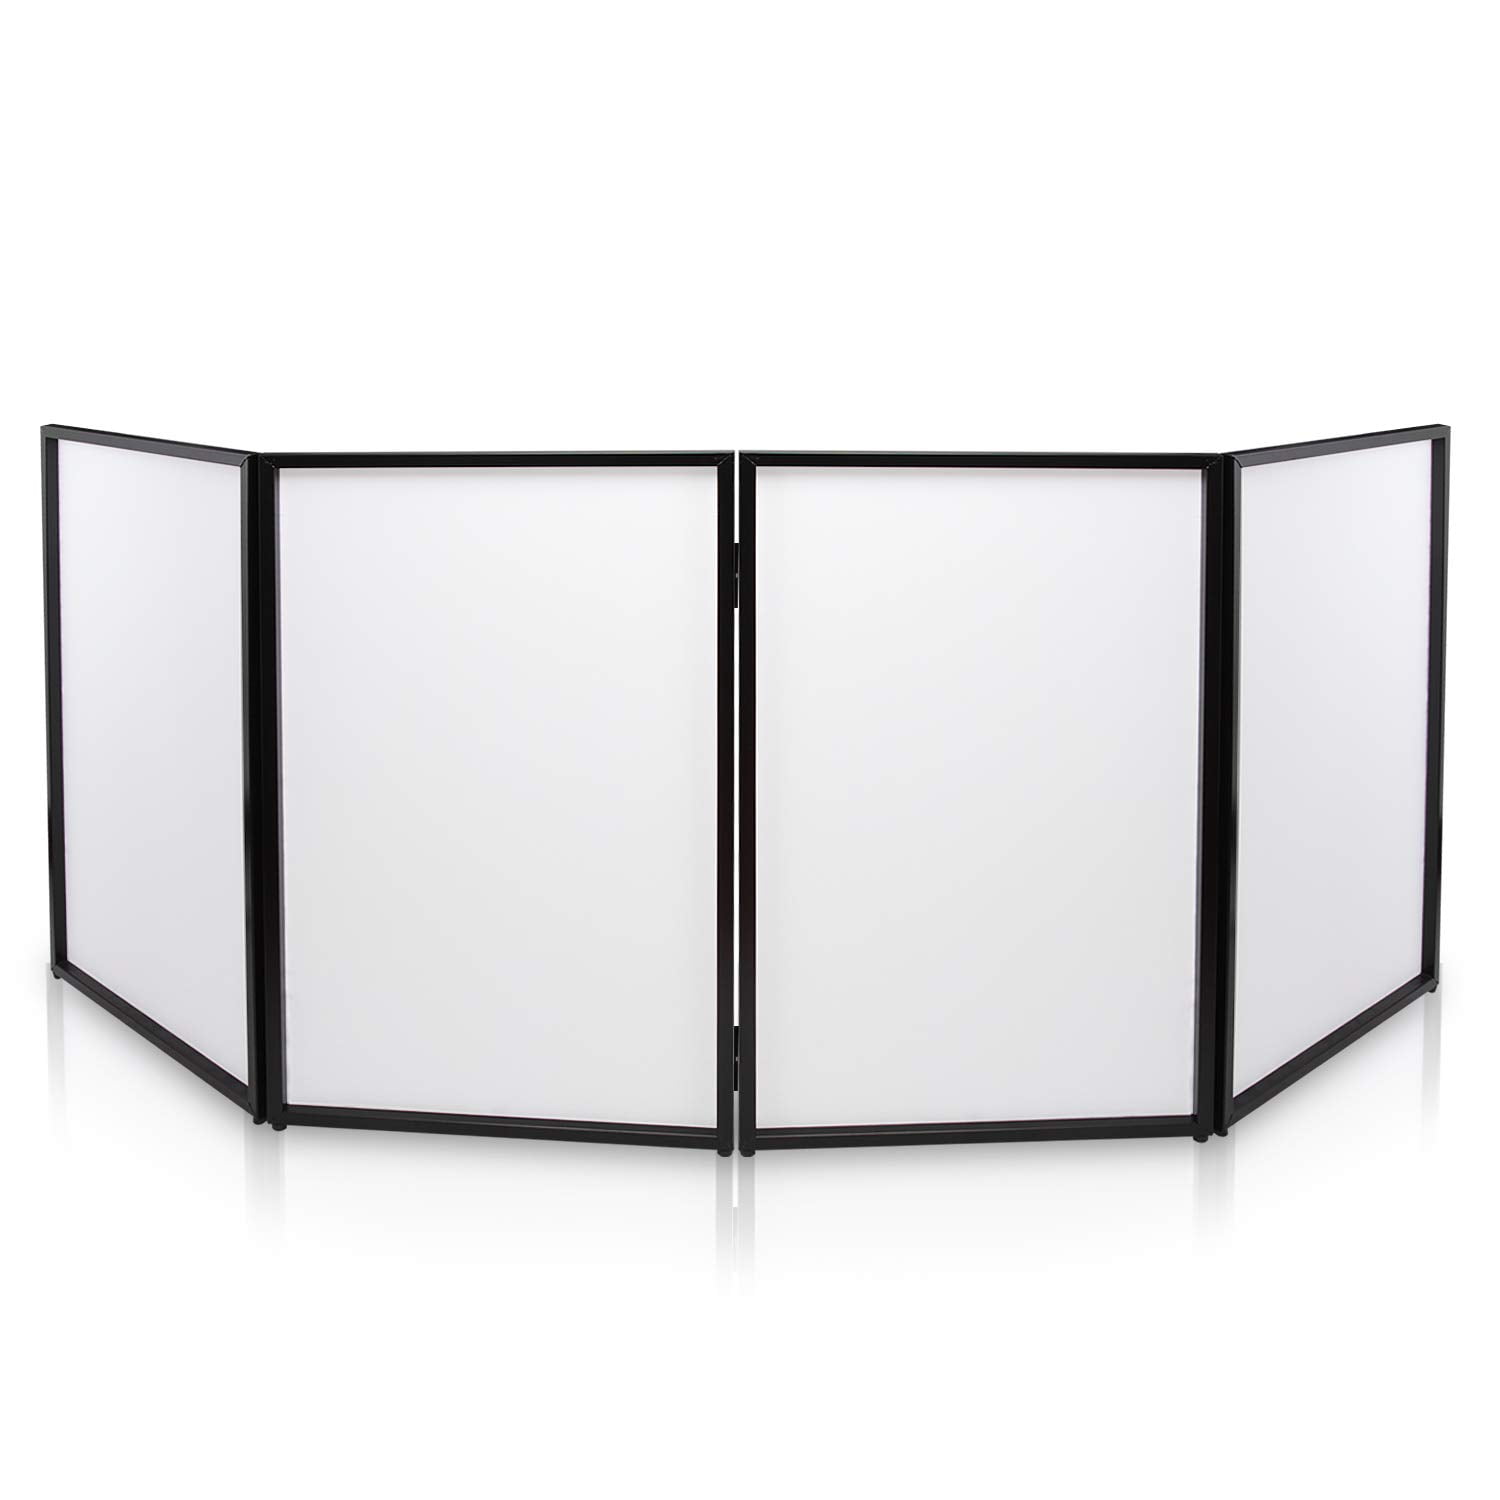 PRORECK DJ Foldable Facade Portable Event Booth Panels 4 Detachable Black Metal Frame Projector Display Scrim Panel with Carry Bag 